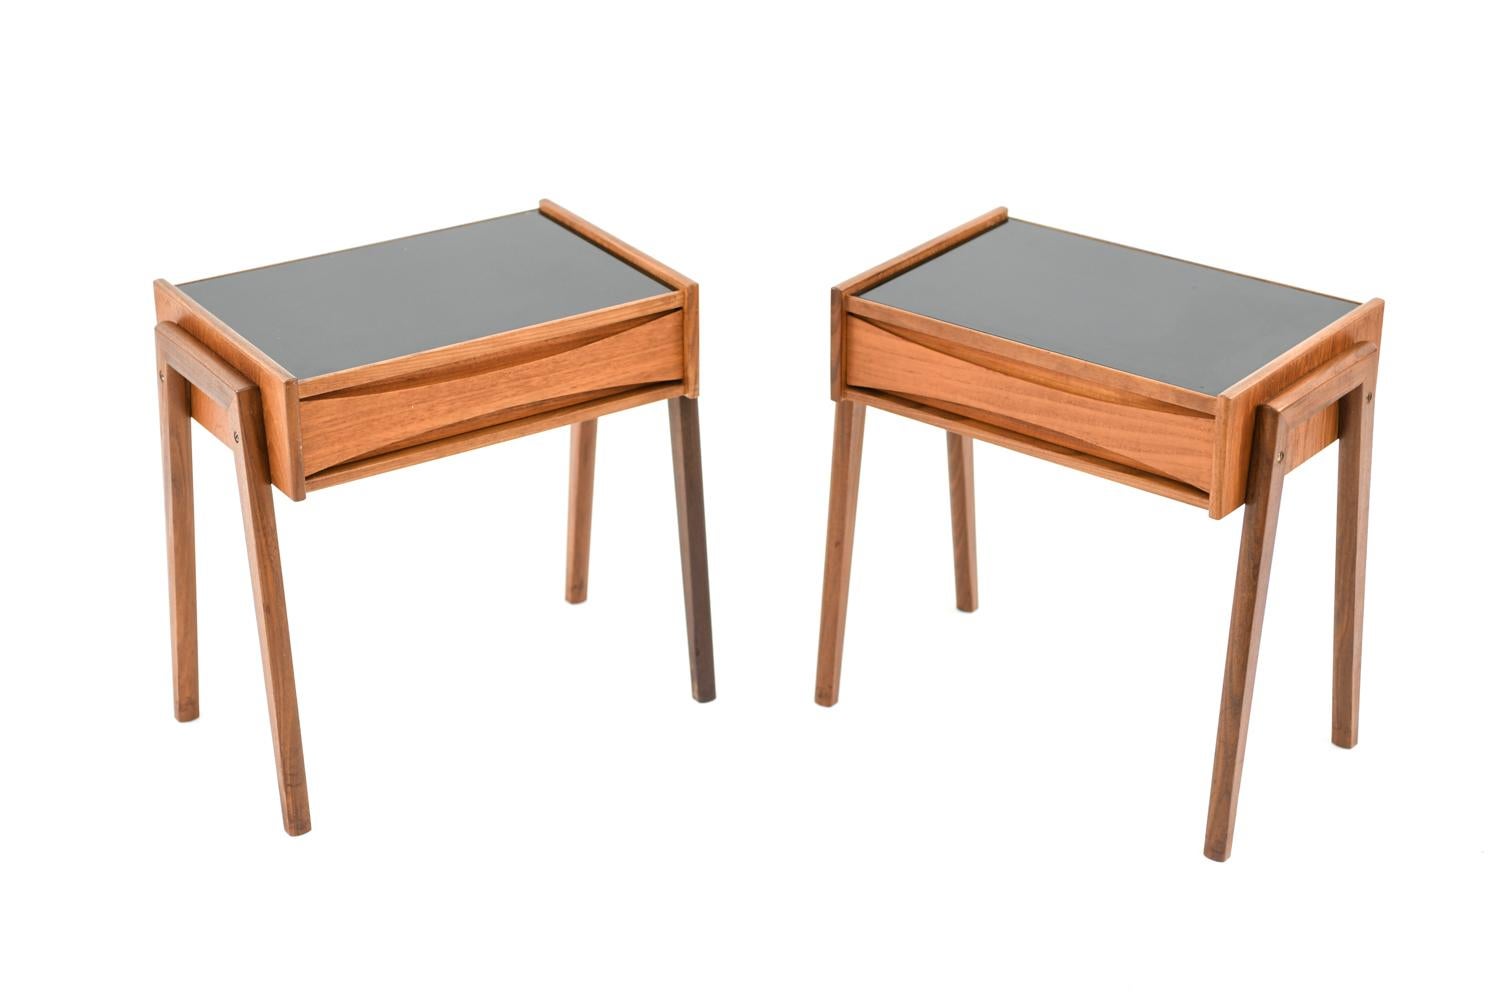 This is a charming pair of Danish midcentury side tables designed by Arne Vodder, most likely to be produced by Sibast, 1960s. These tables feature teak frames with black glass tops, giving them a sleek, modern look. The sculptured drawer front and